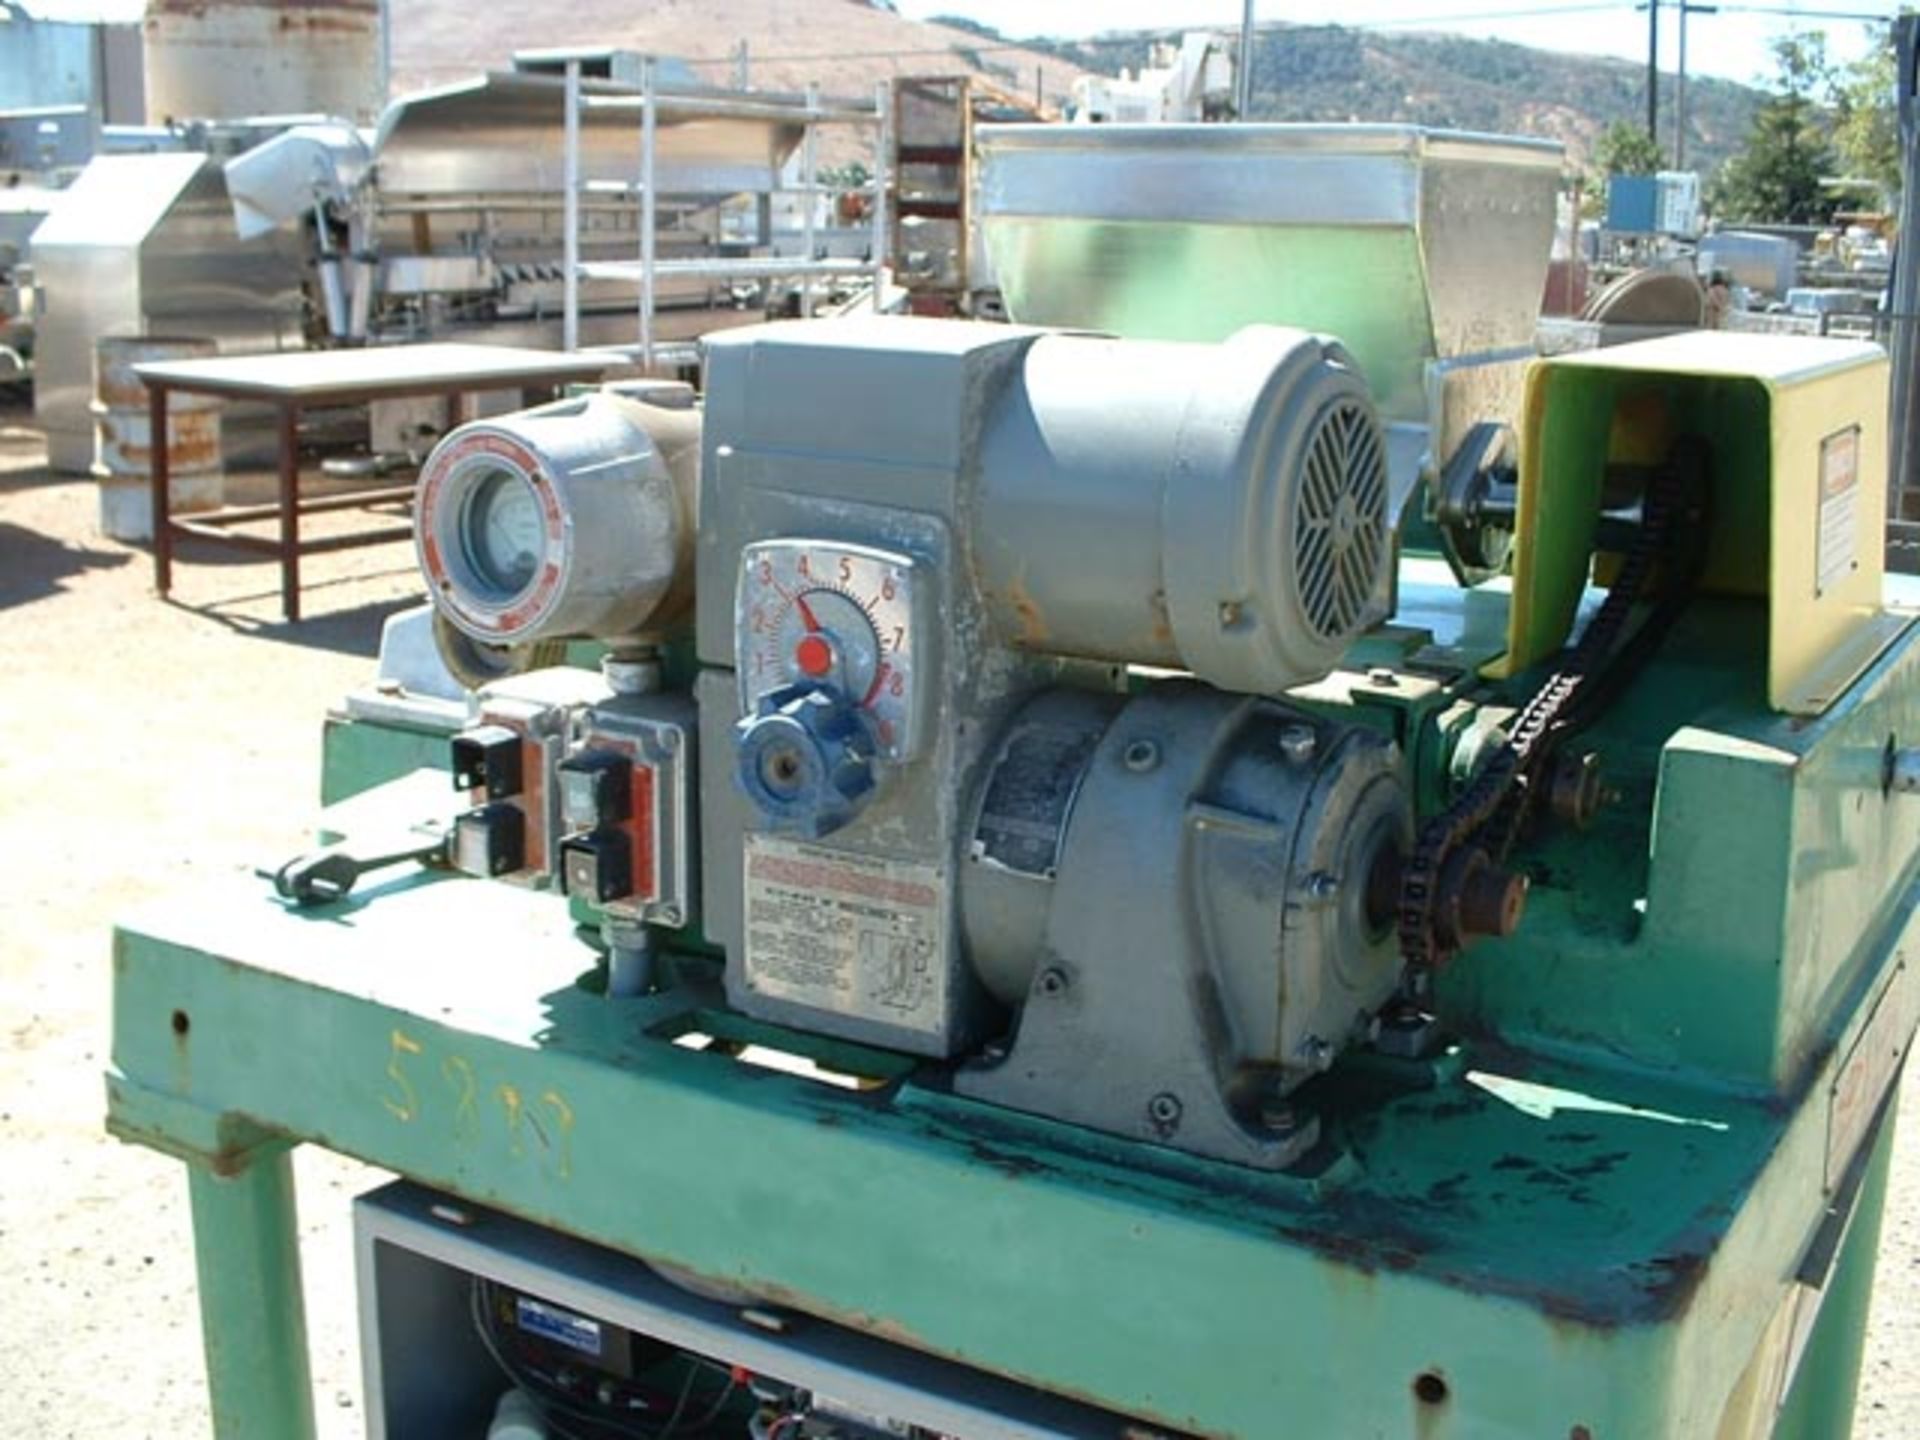 (Located in Morgan Hill, CA) Fitzpatrick Hammer Mill, Model DAS06, SN 9223, Auger Feed, S/S Product - Image 6 of 6